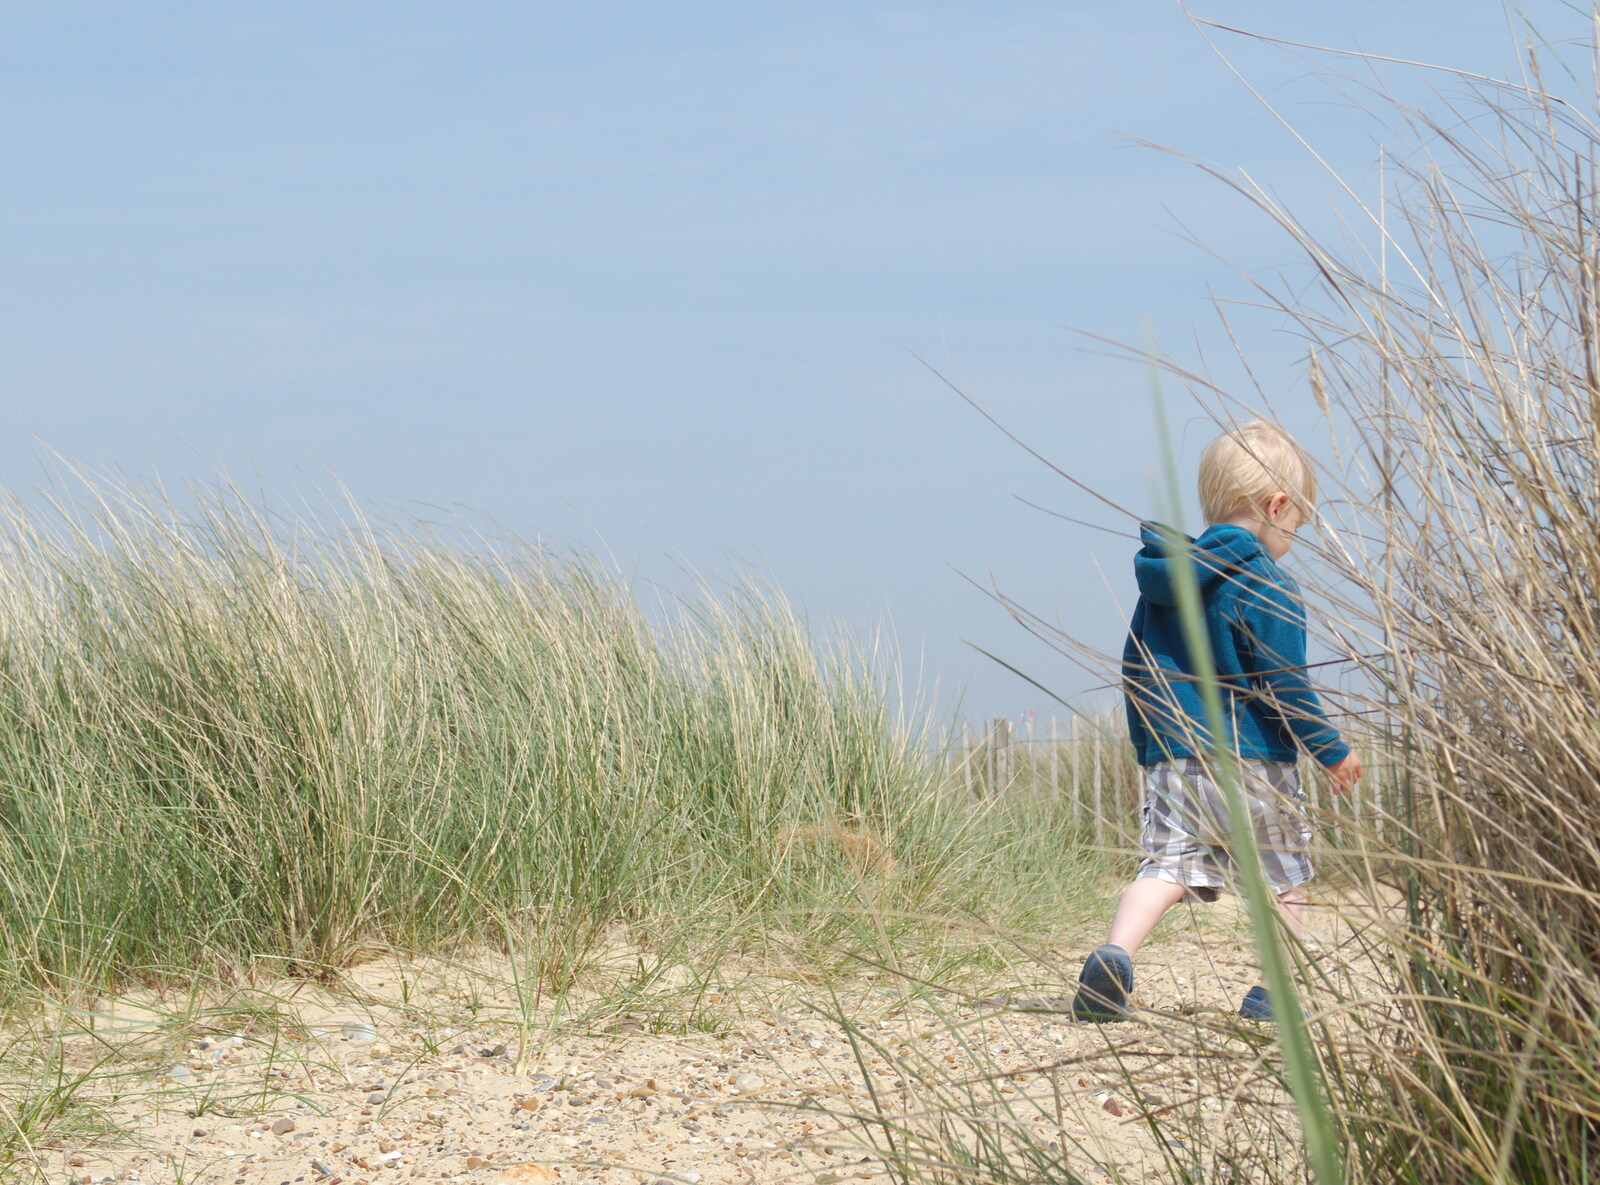 Harry sets off on an escape attempt from Life's A Windy Beach, Walberswick, Suffolk - 5th May 2014